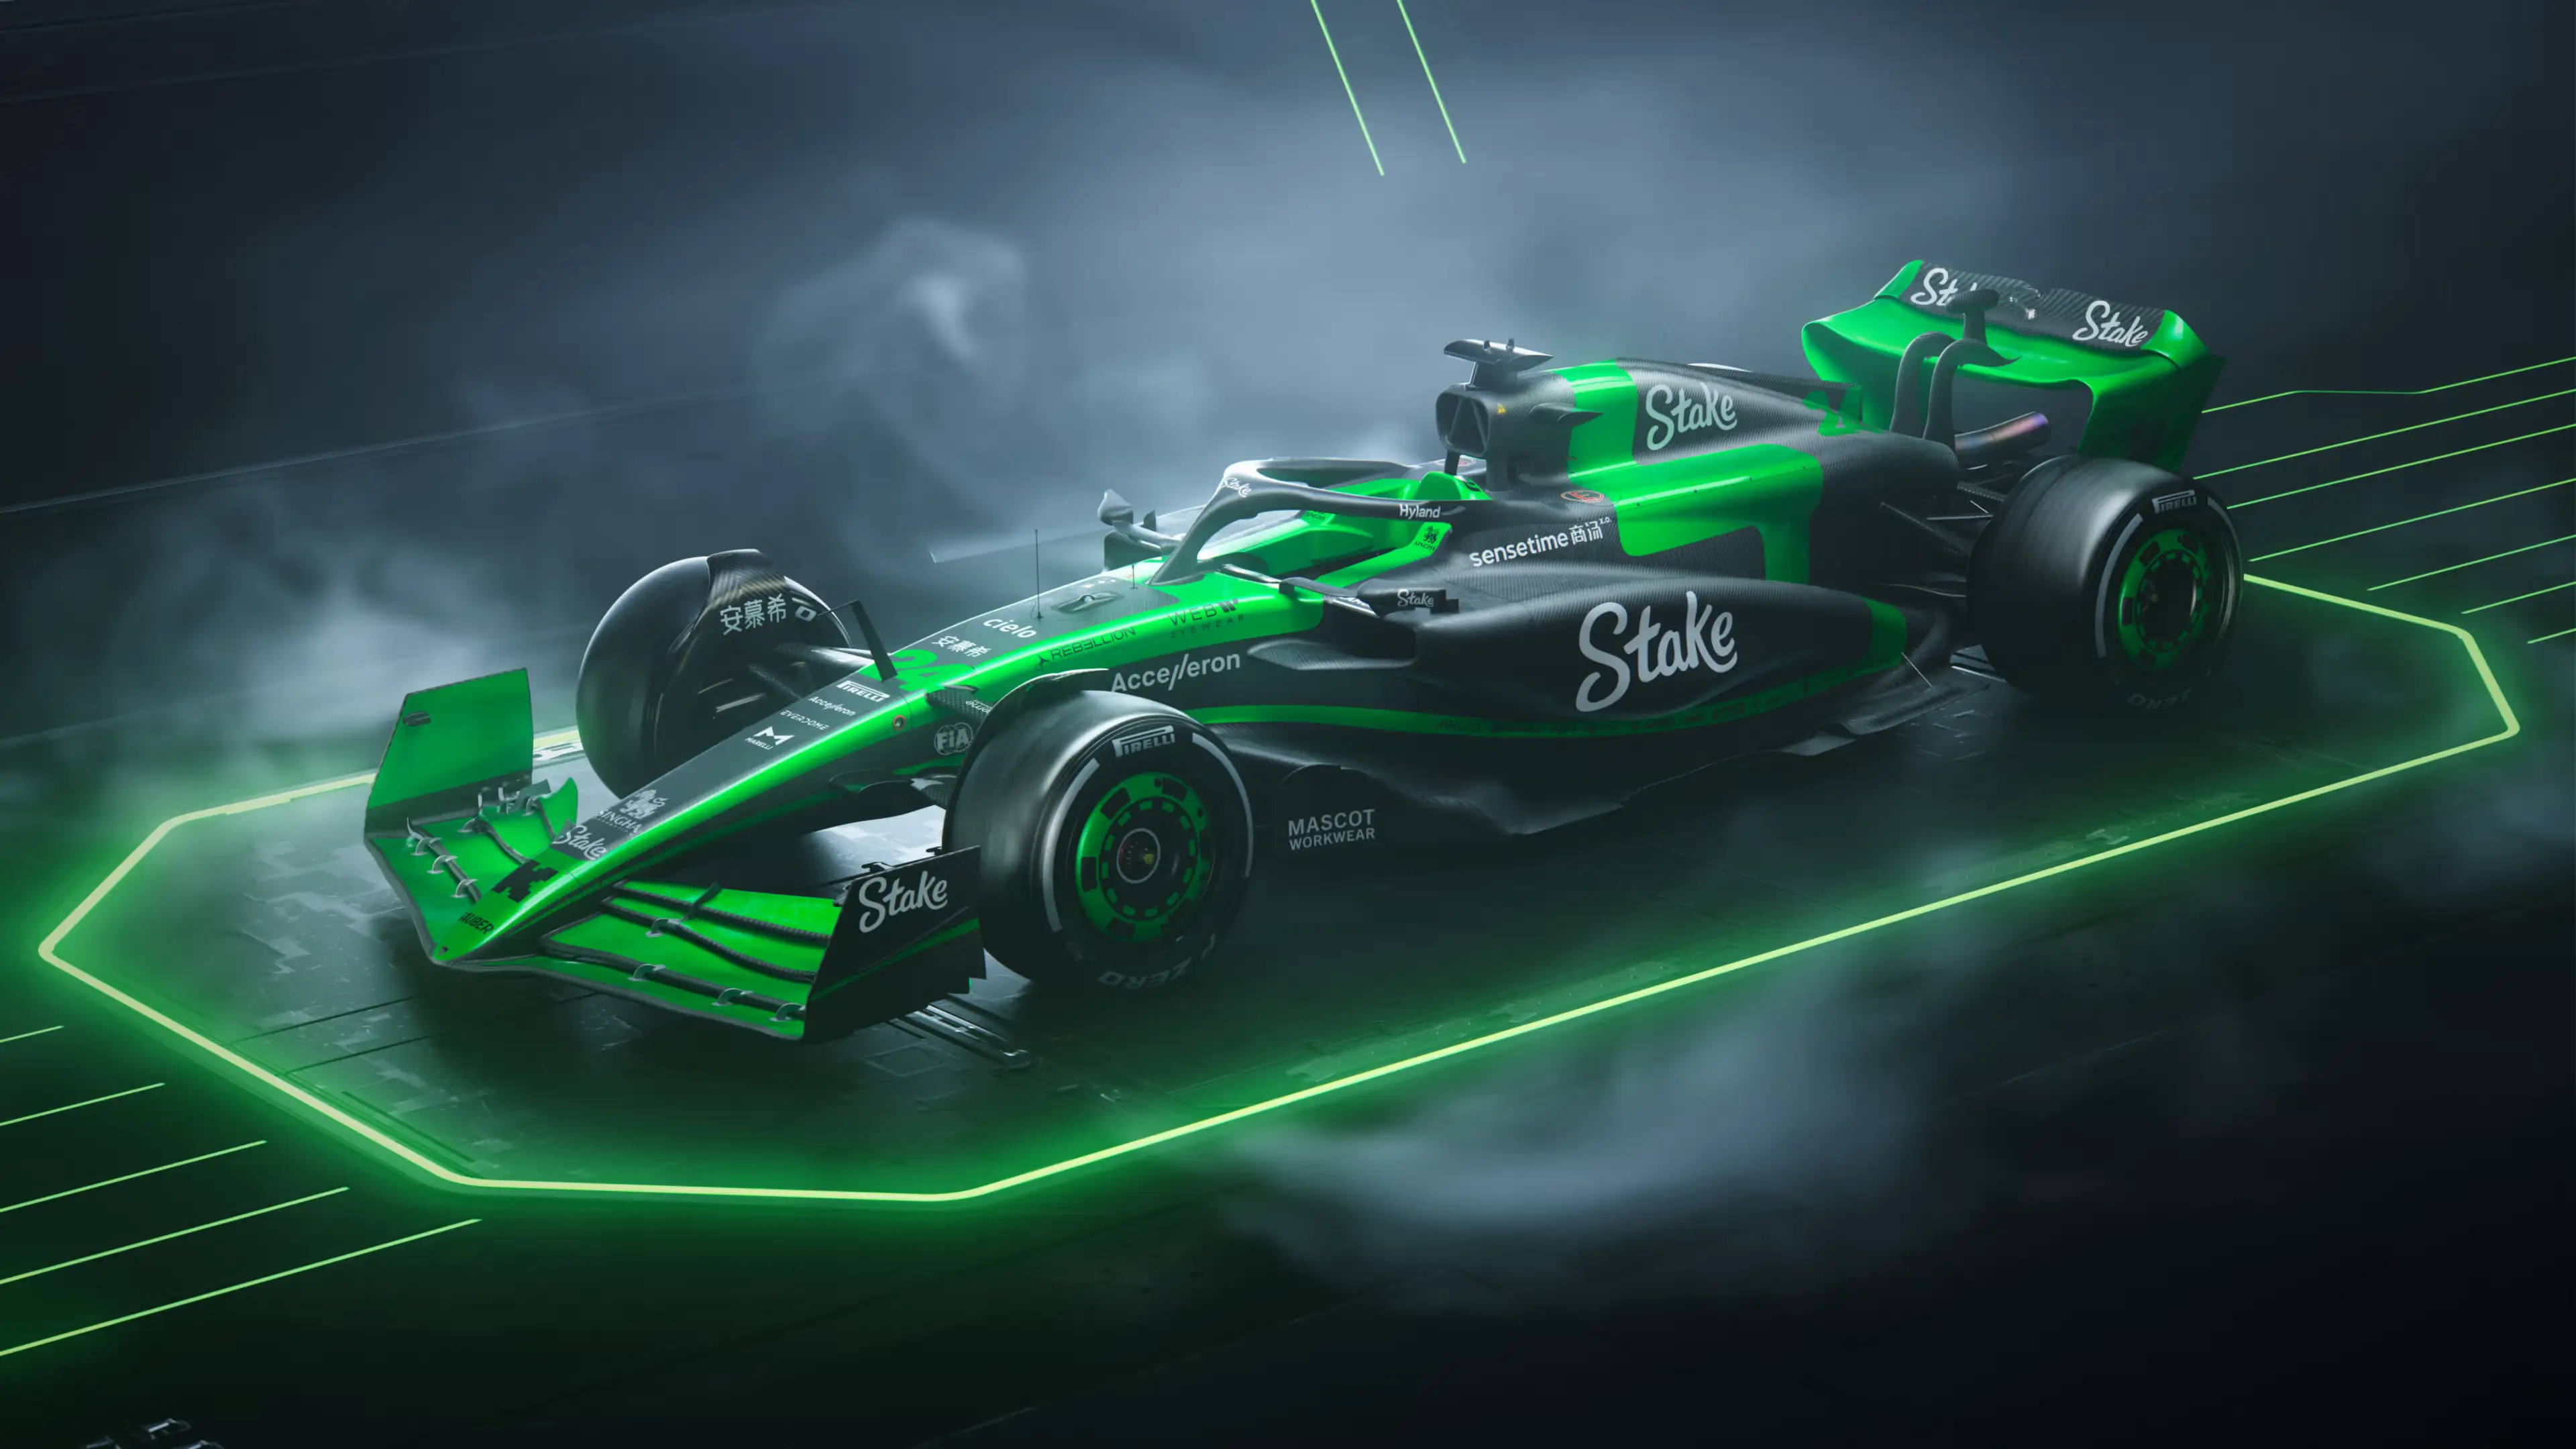 Kick Sauber Car Launch Dazzling New Livery and C44 Car